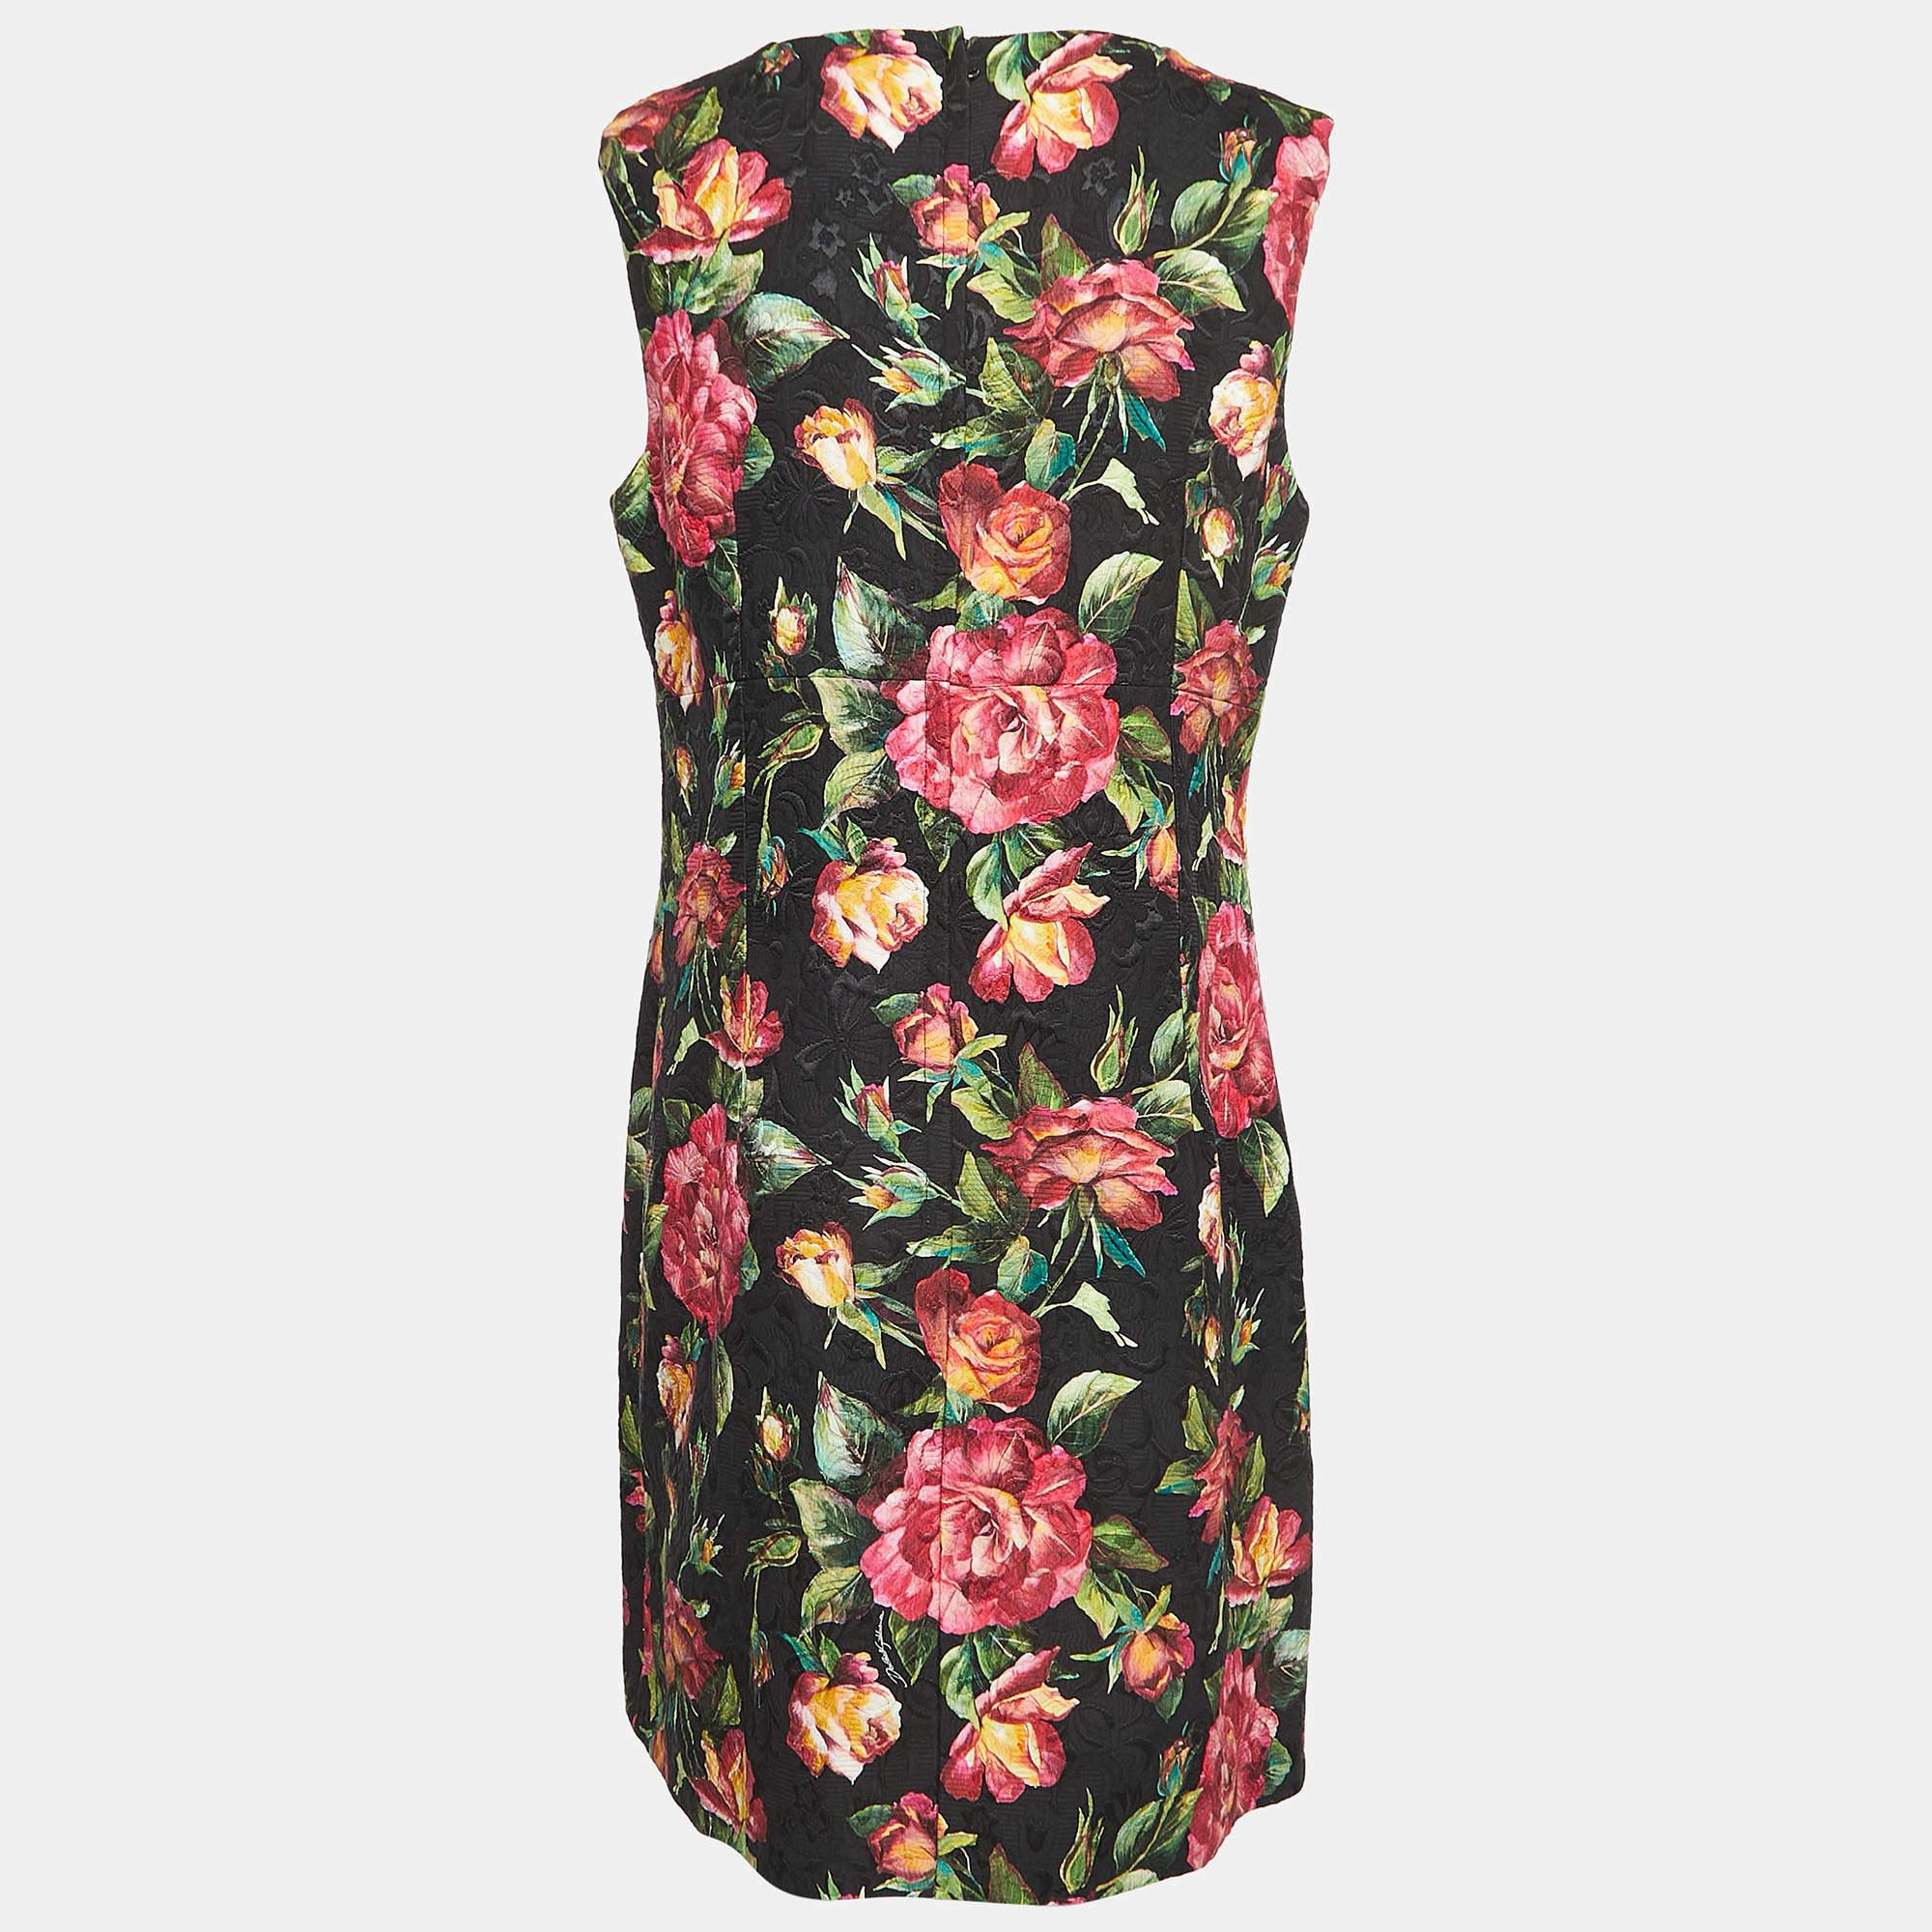 Add an element of elegance to your summer outfit by wearing this gorgeous dress from Dolce & Gabbana. This dress can be matched with statement accessories to obtain a chic look.

Includes: Brand Tag